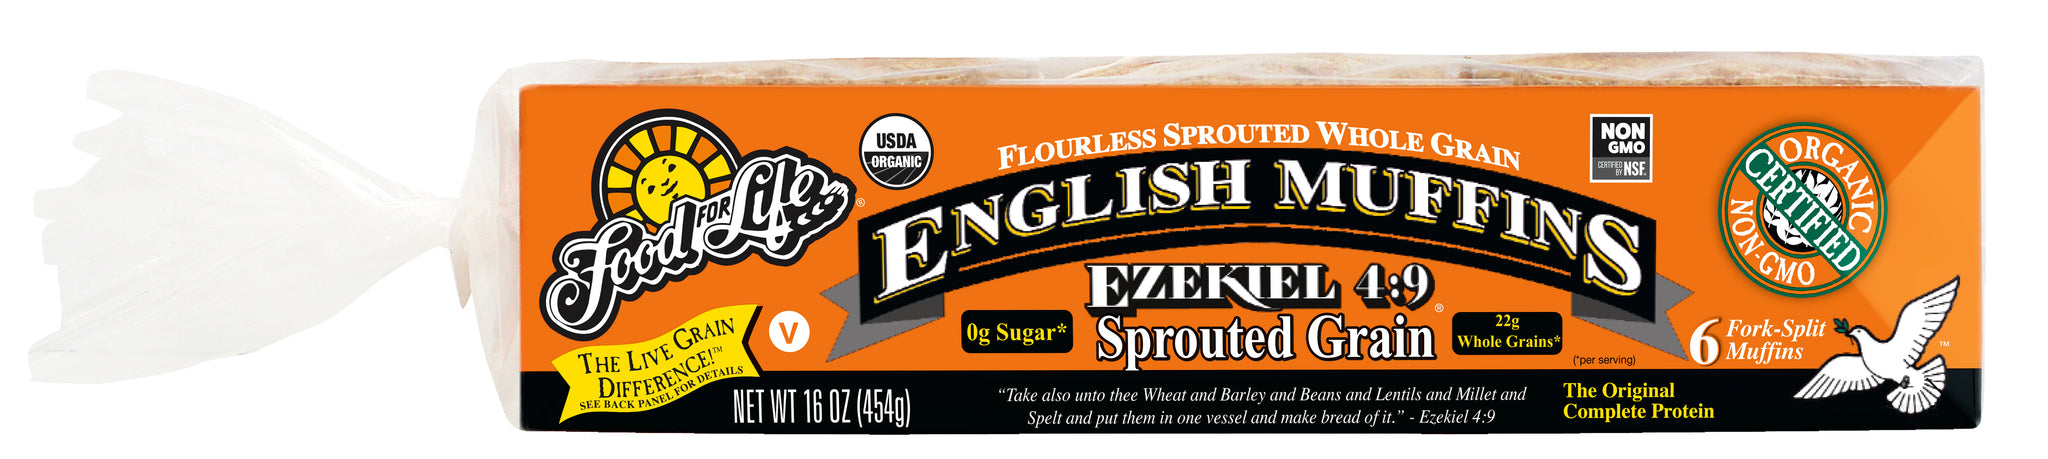 Food For Life Organic Ezekiel 4:9 Sprouted Whole Grain English Muffins, 16 Oz (Pack of 6)